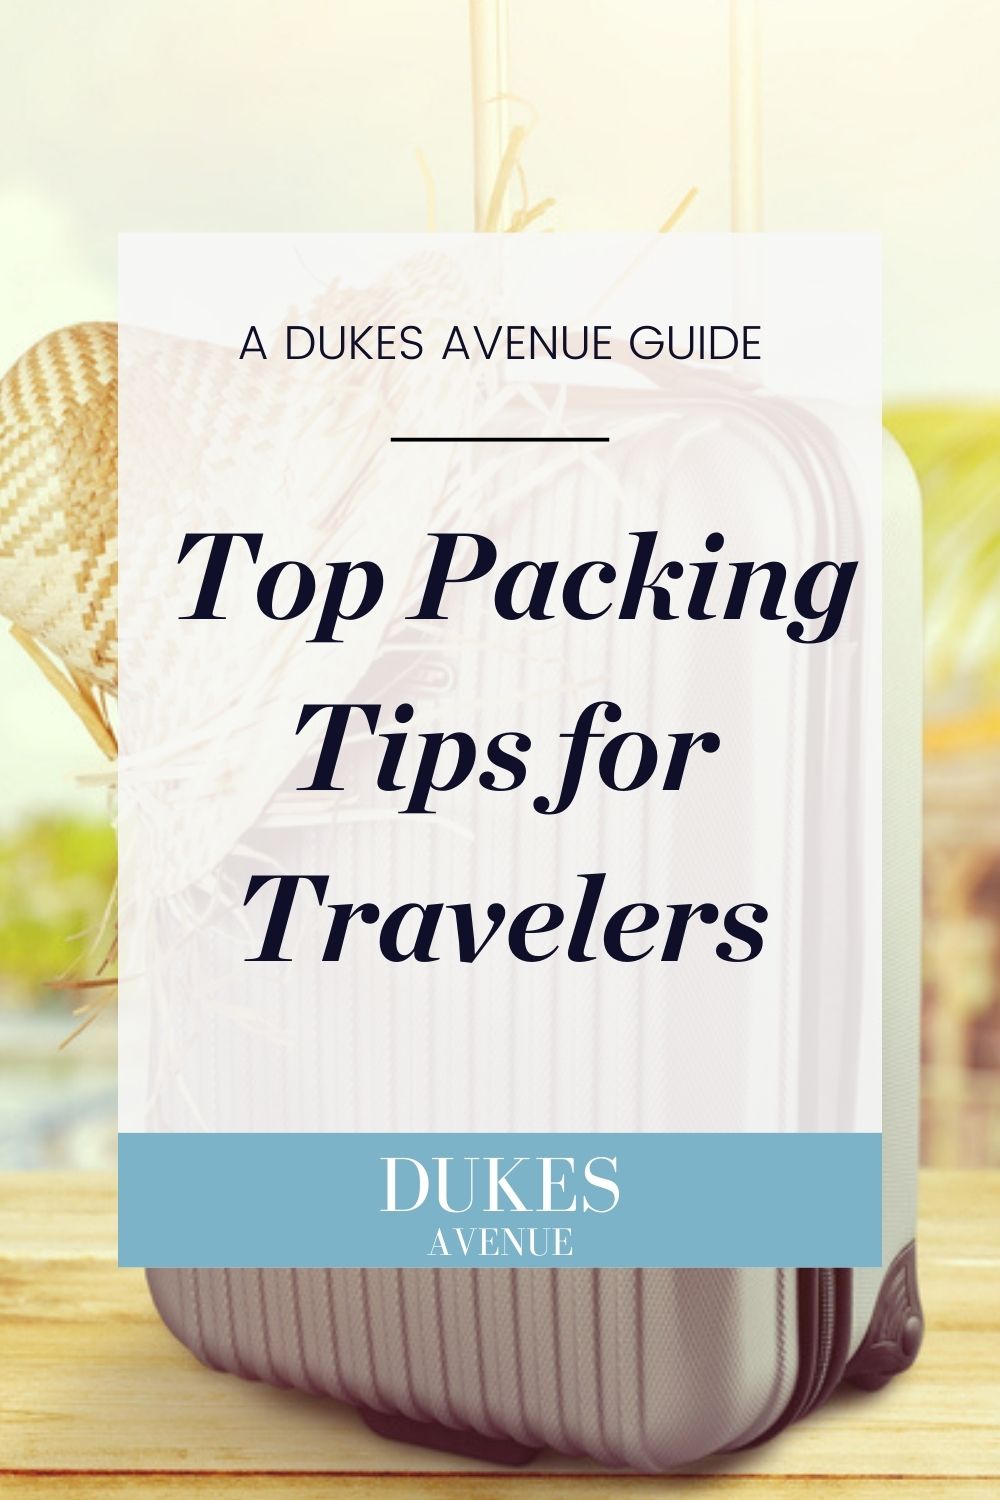 Image of suitcase and straw hat with text overlay 'Top Packing Tips for Travelers'